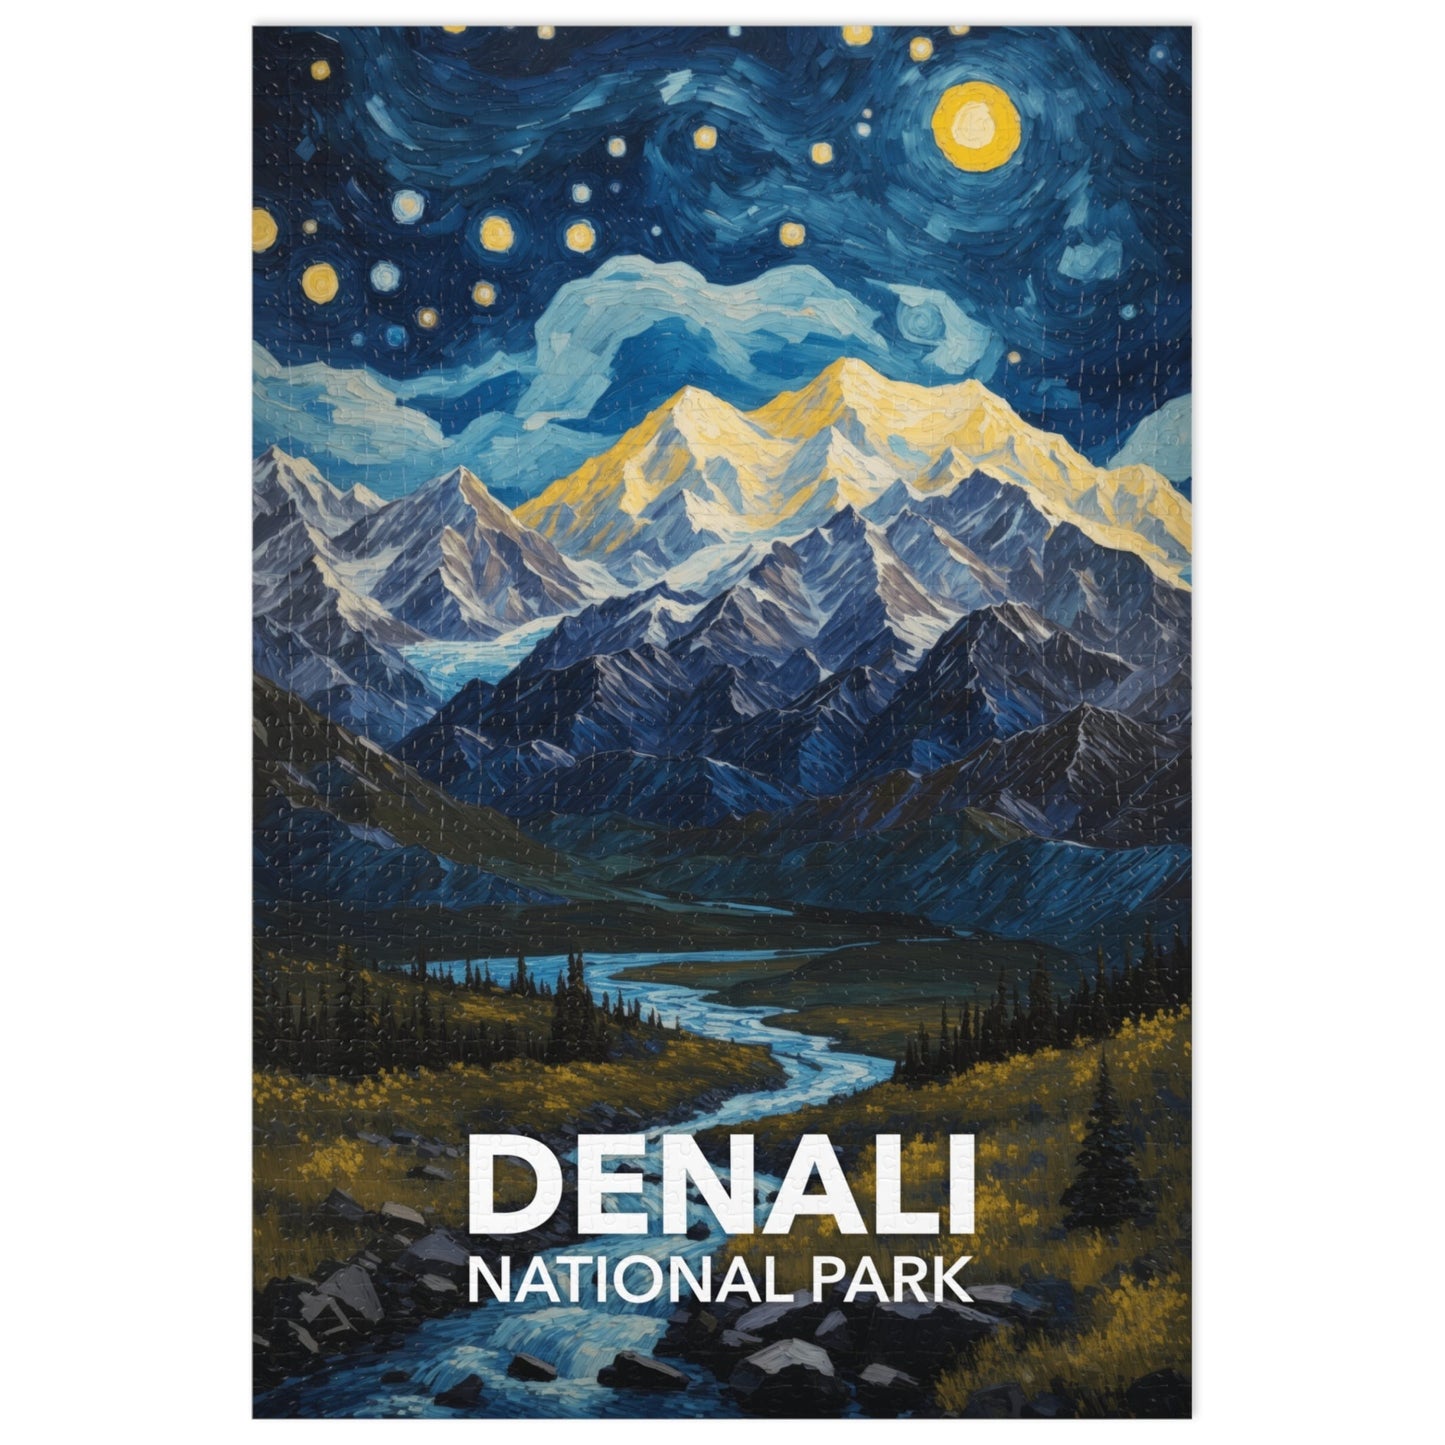 Denali National Park Jigsaw Puzzle - The Starry Night